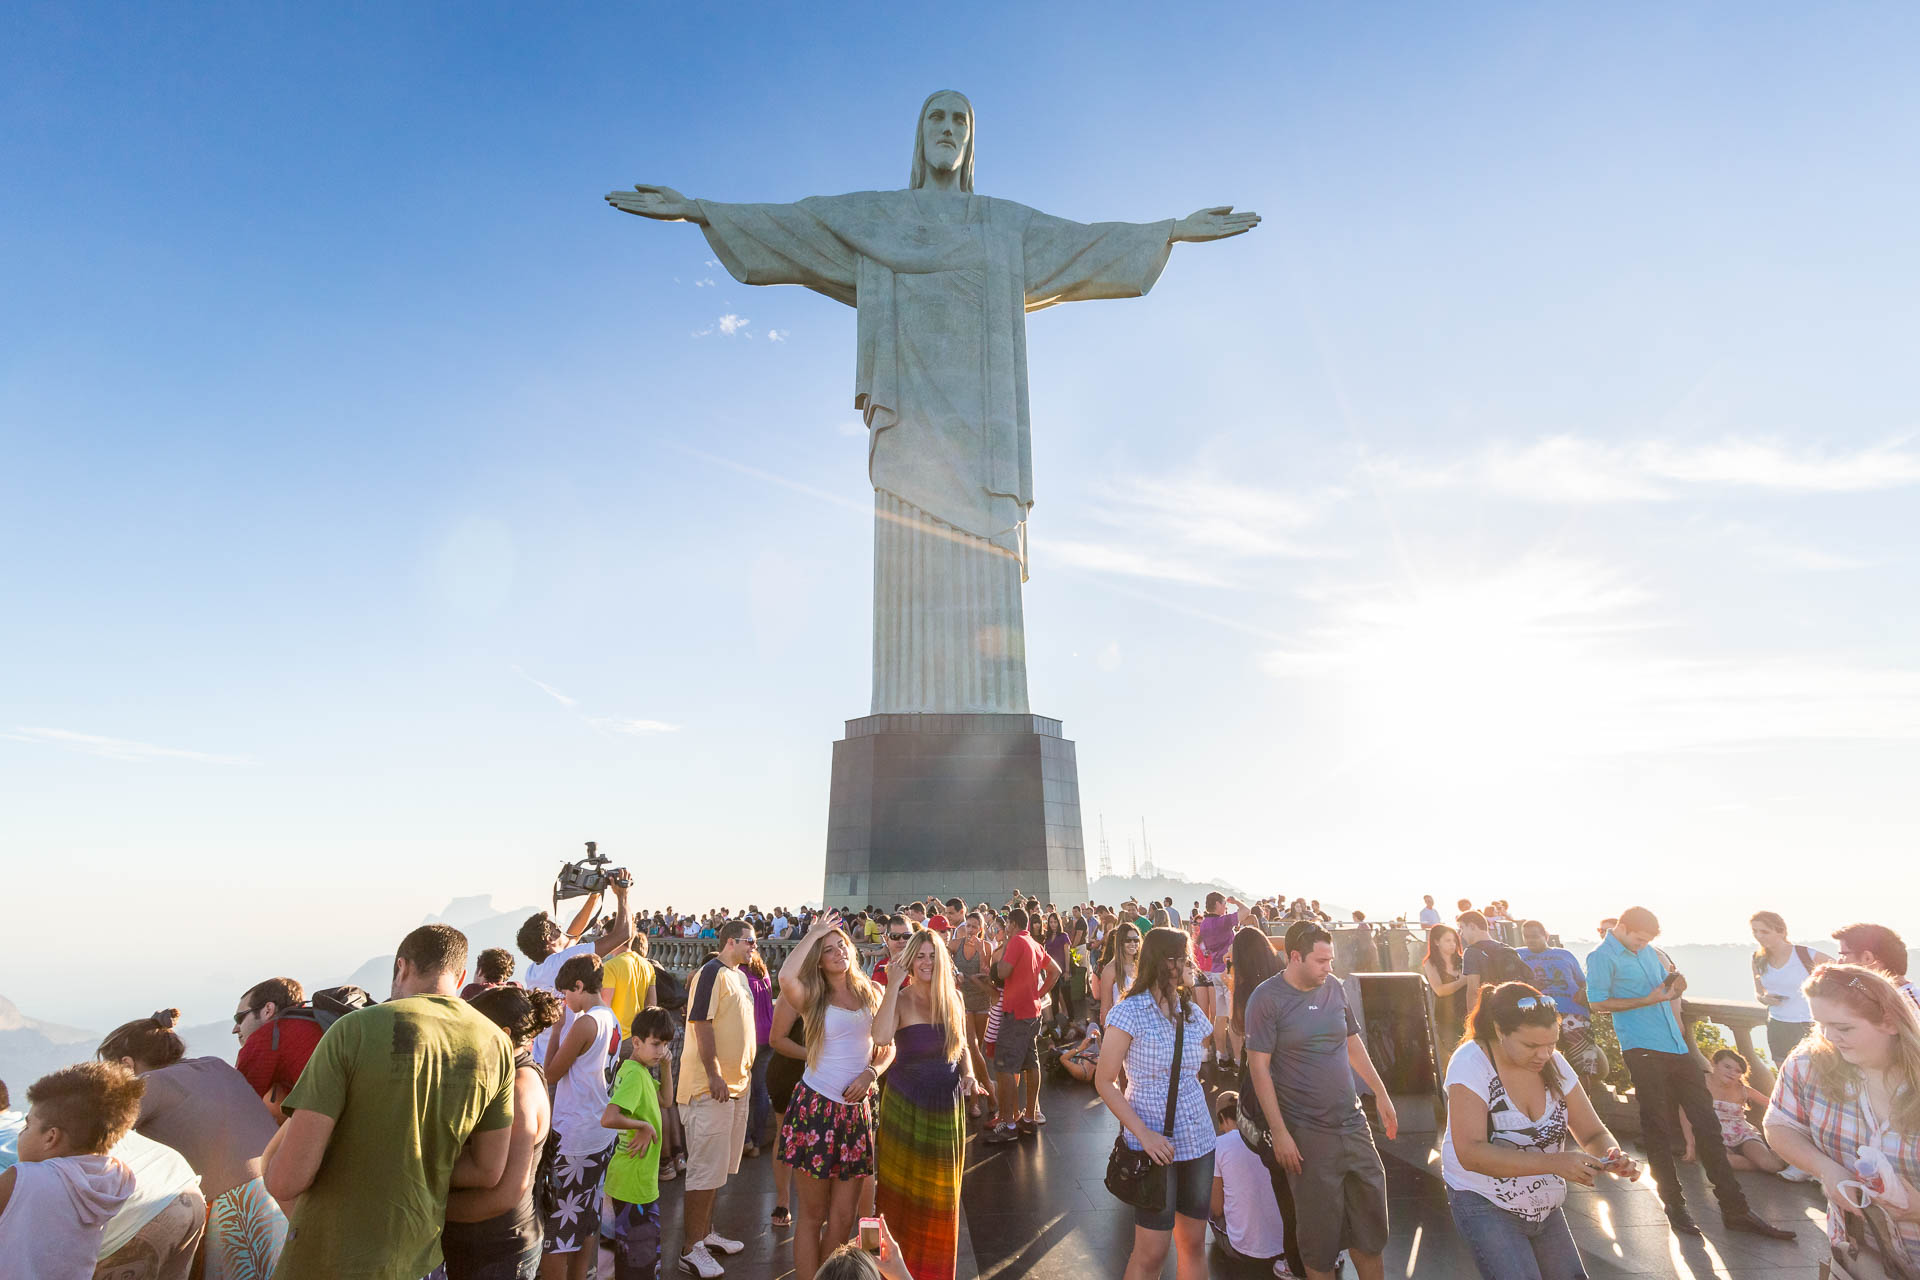 A crowd of tourists visit the iconic Christ the Redeemer statue in Rio de Janeiro, Brazil